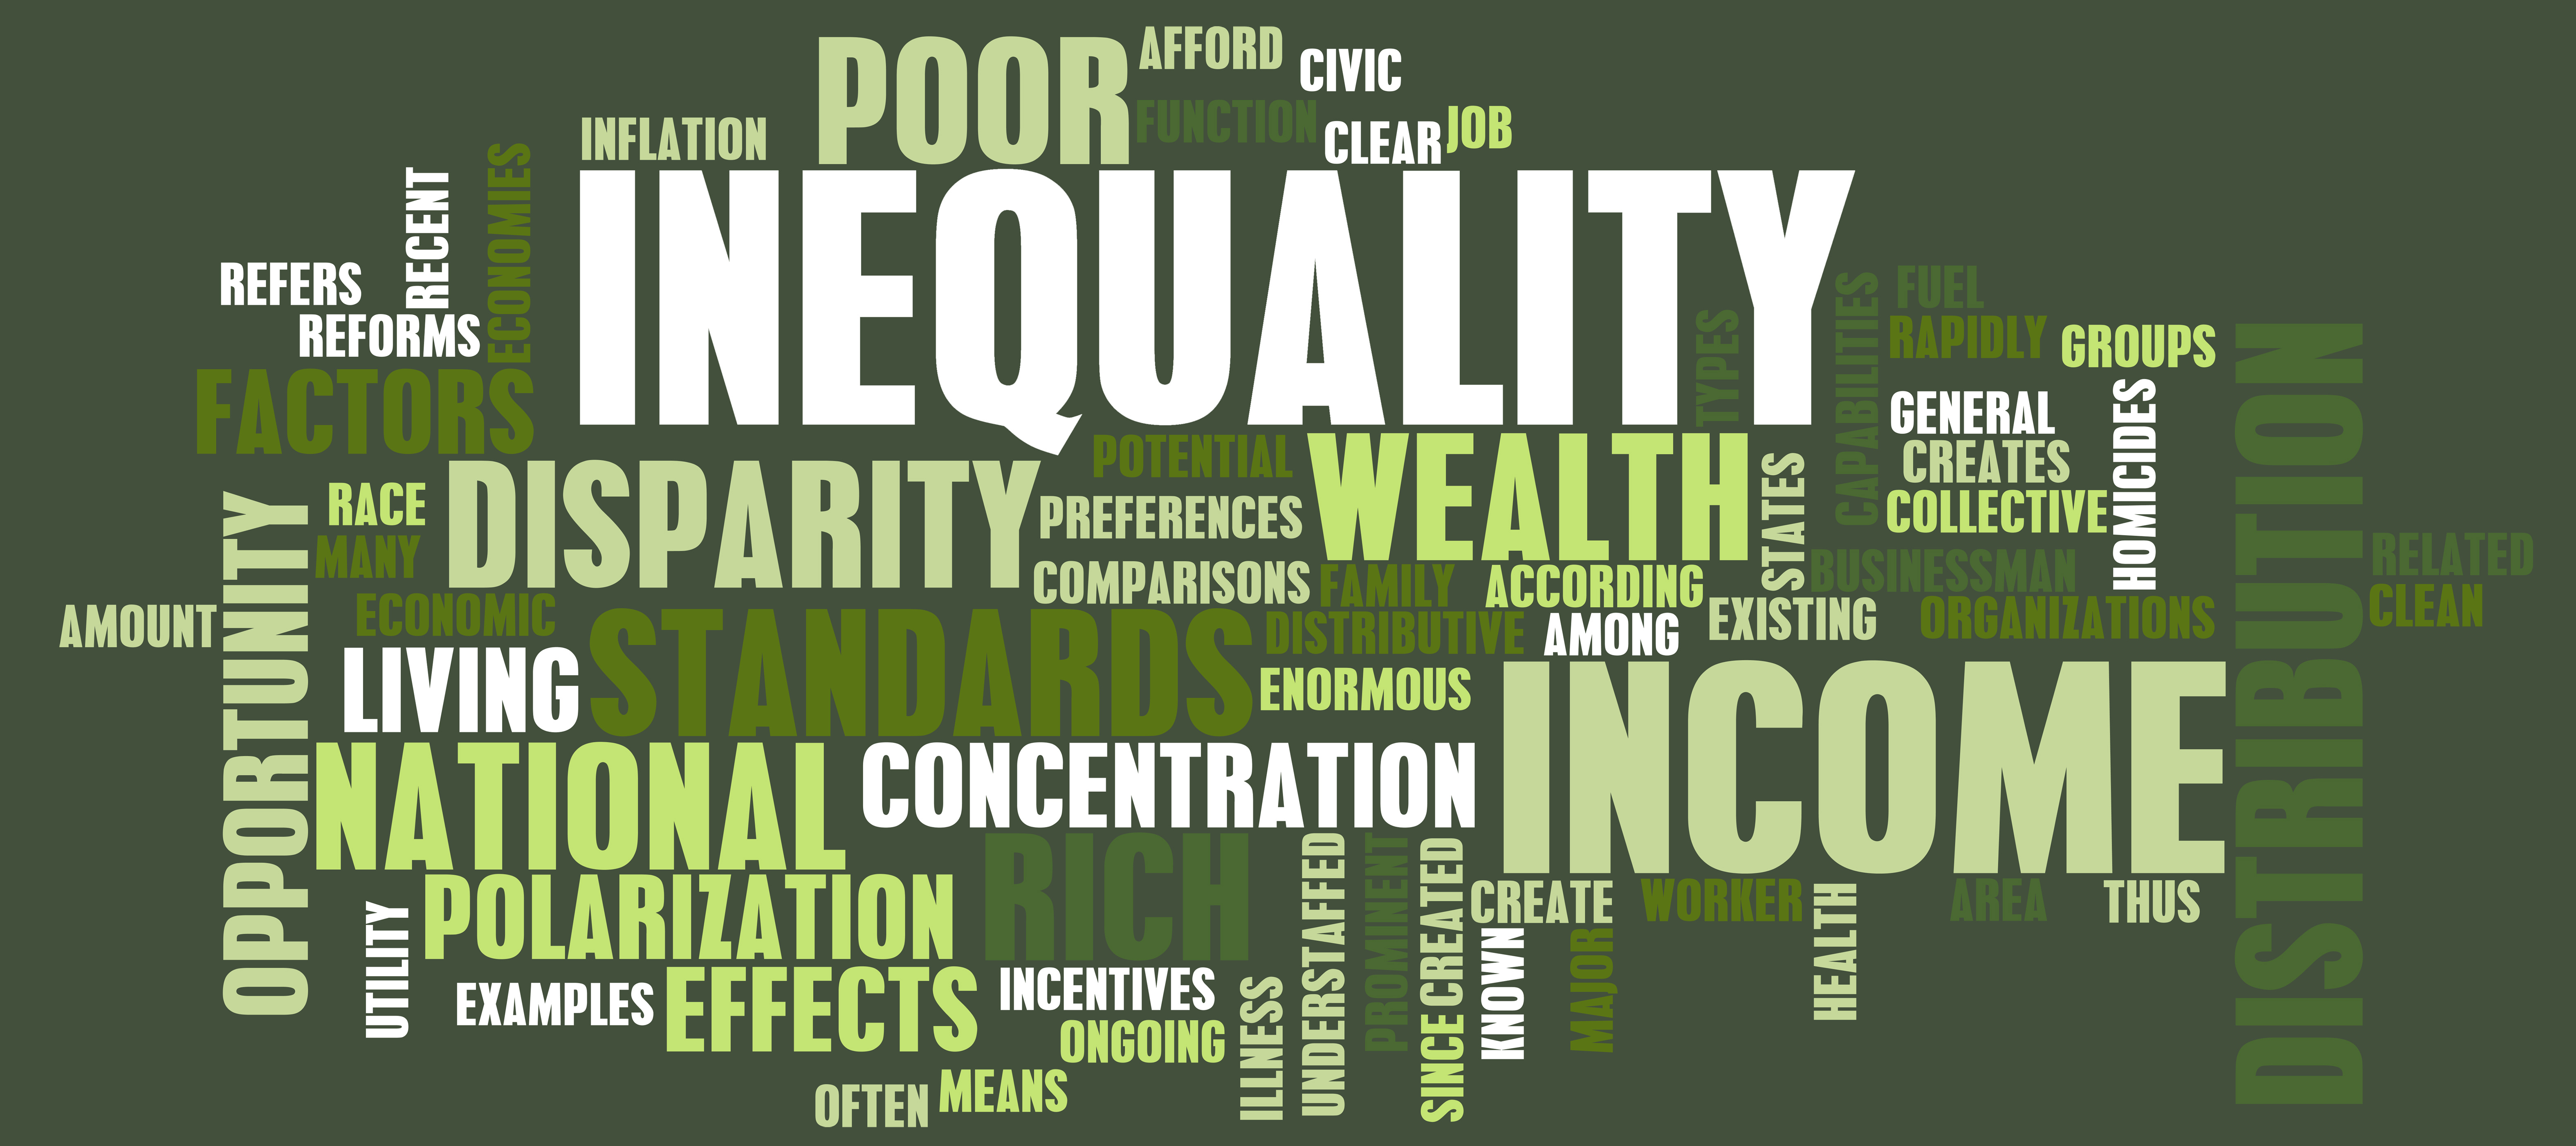 I dream of Gini or How is income inequality defined?